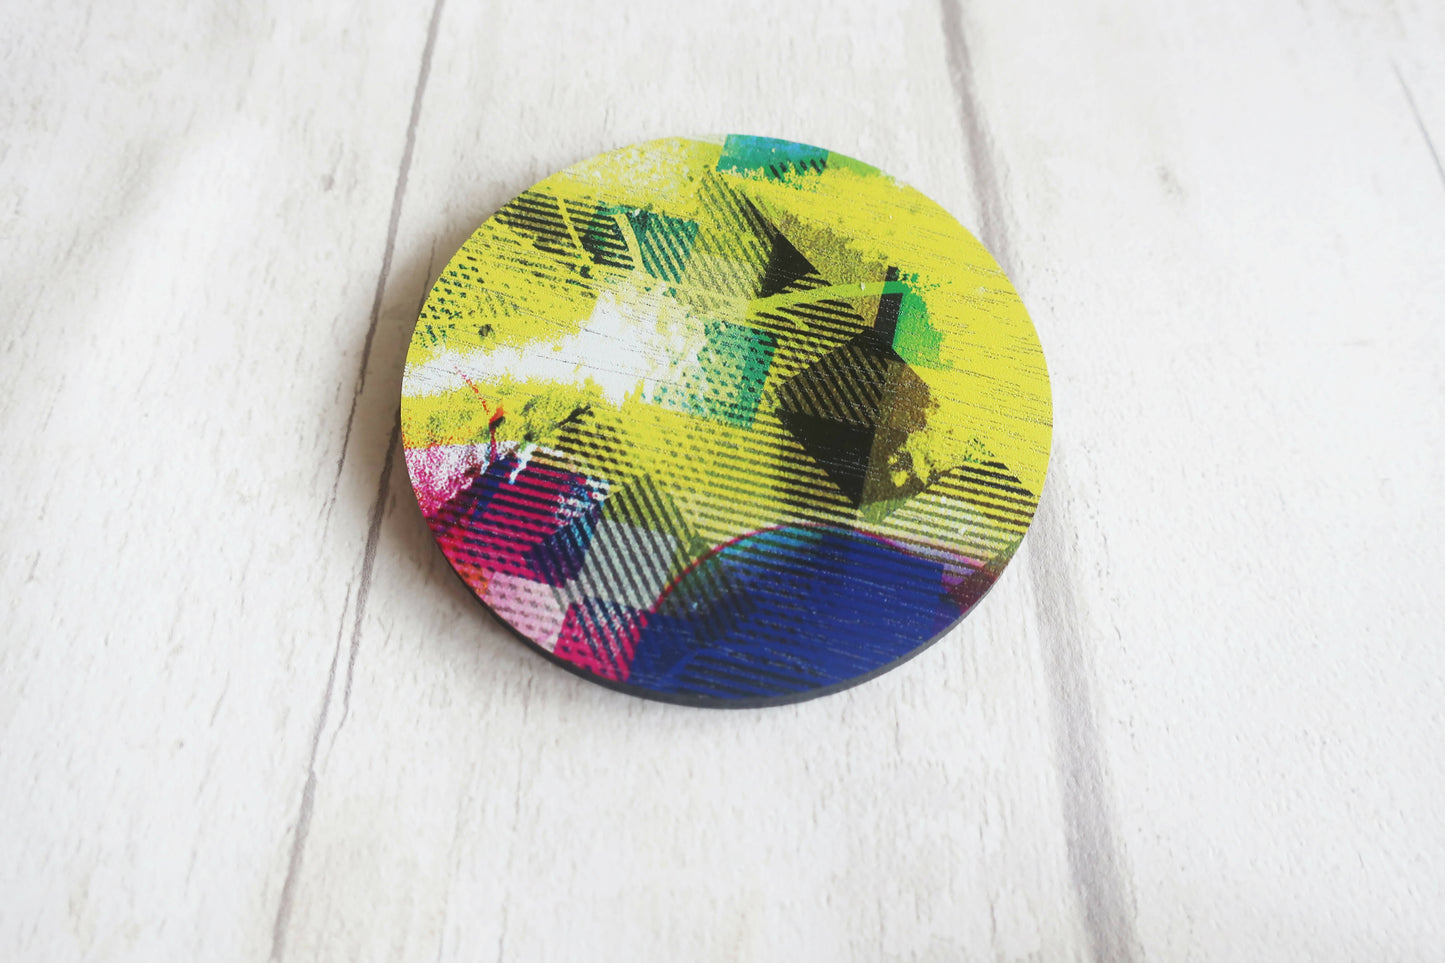 Large statement yellow brooch, round graphic pin brooch